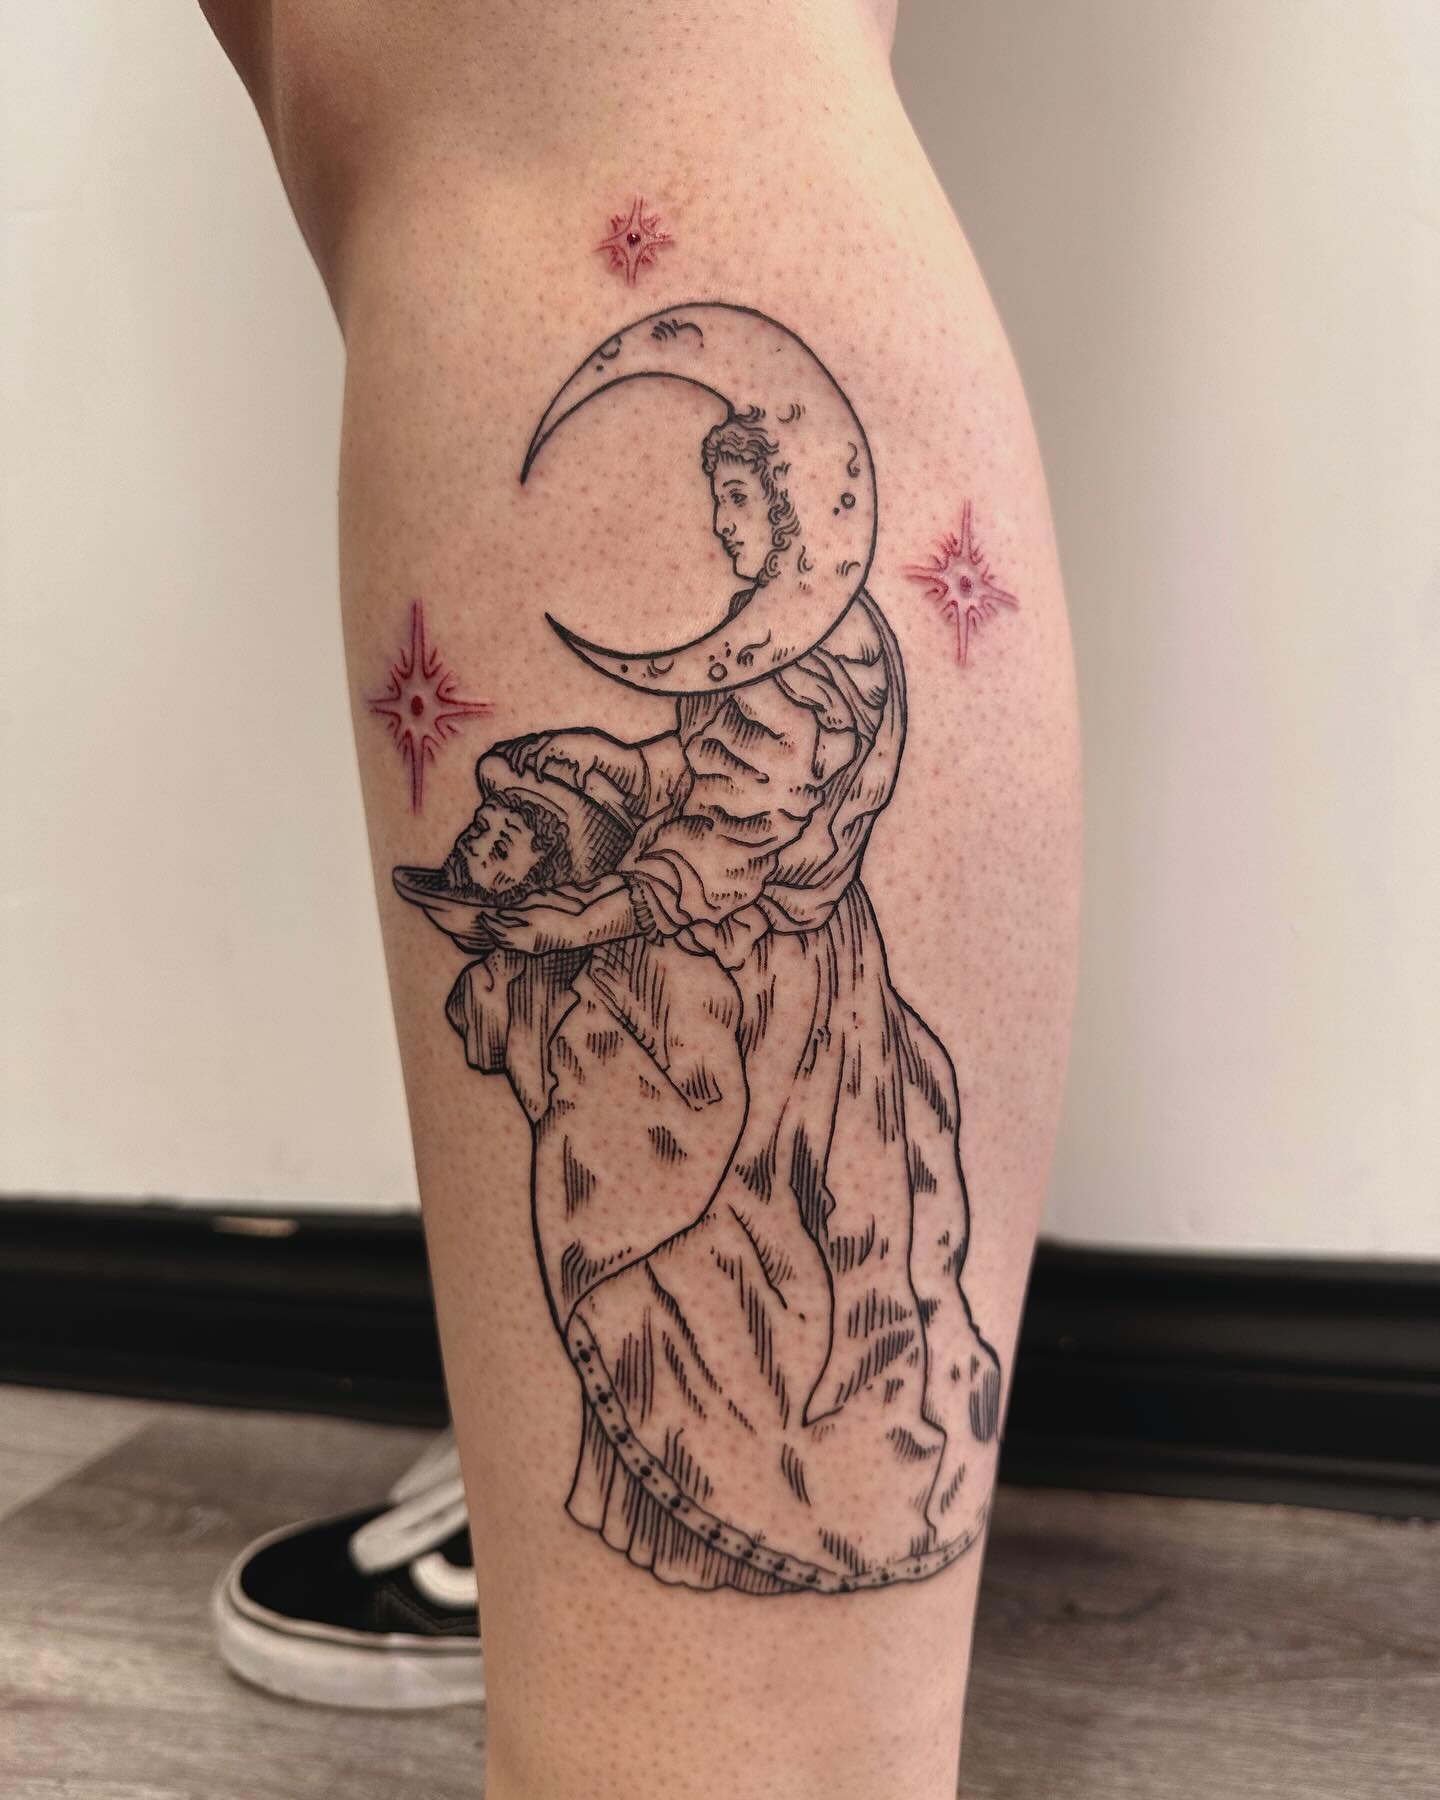 ⚜️leg adornment⚜️
Thanks so much for coming in!
.
.
.
.
.
.
.
.
.
.
.
.
.
.
.
#tattoo #finelinetattoo #witchy #pagan #goth #gothic #tattoos #art